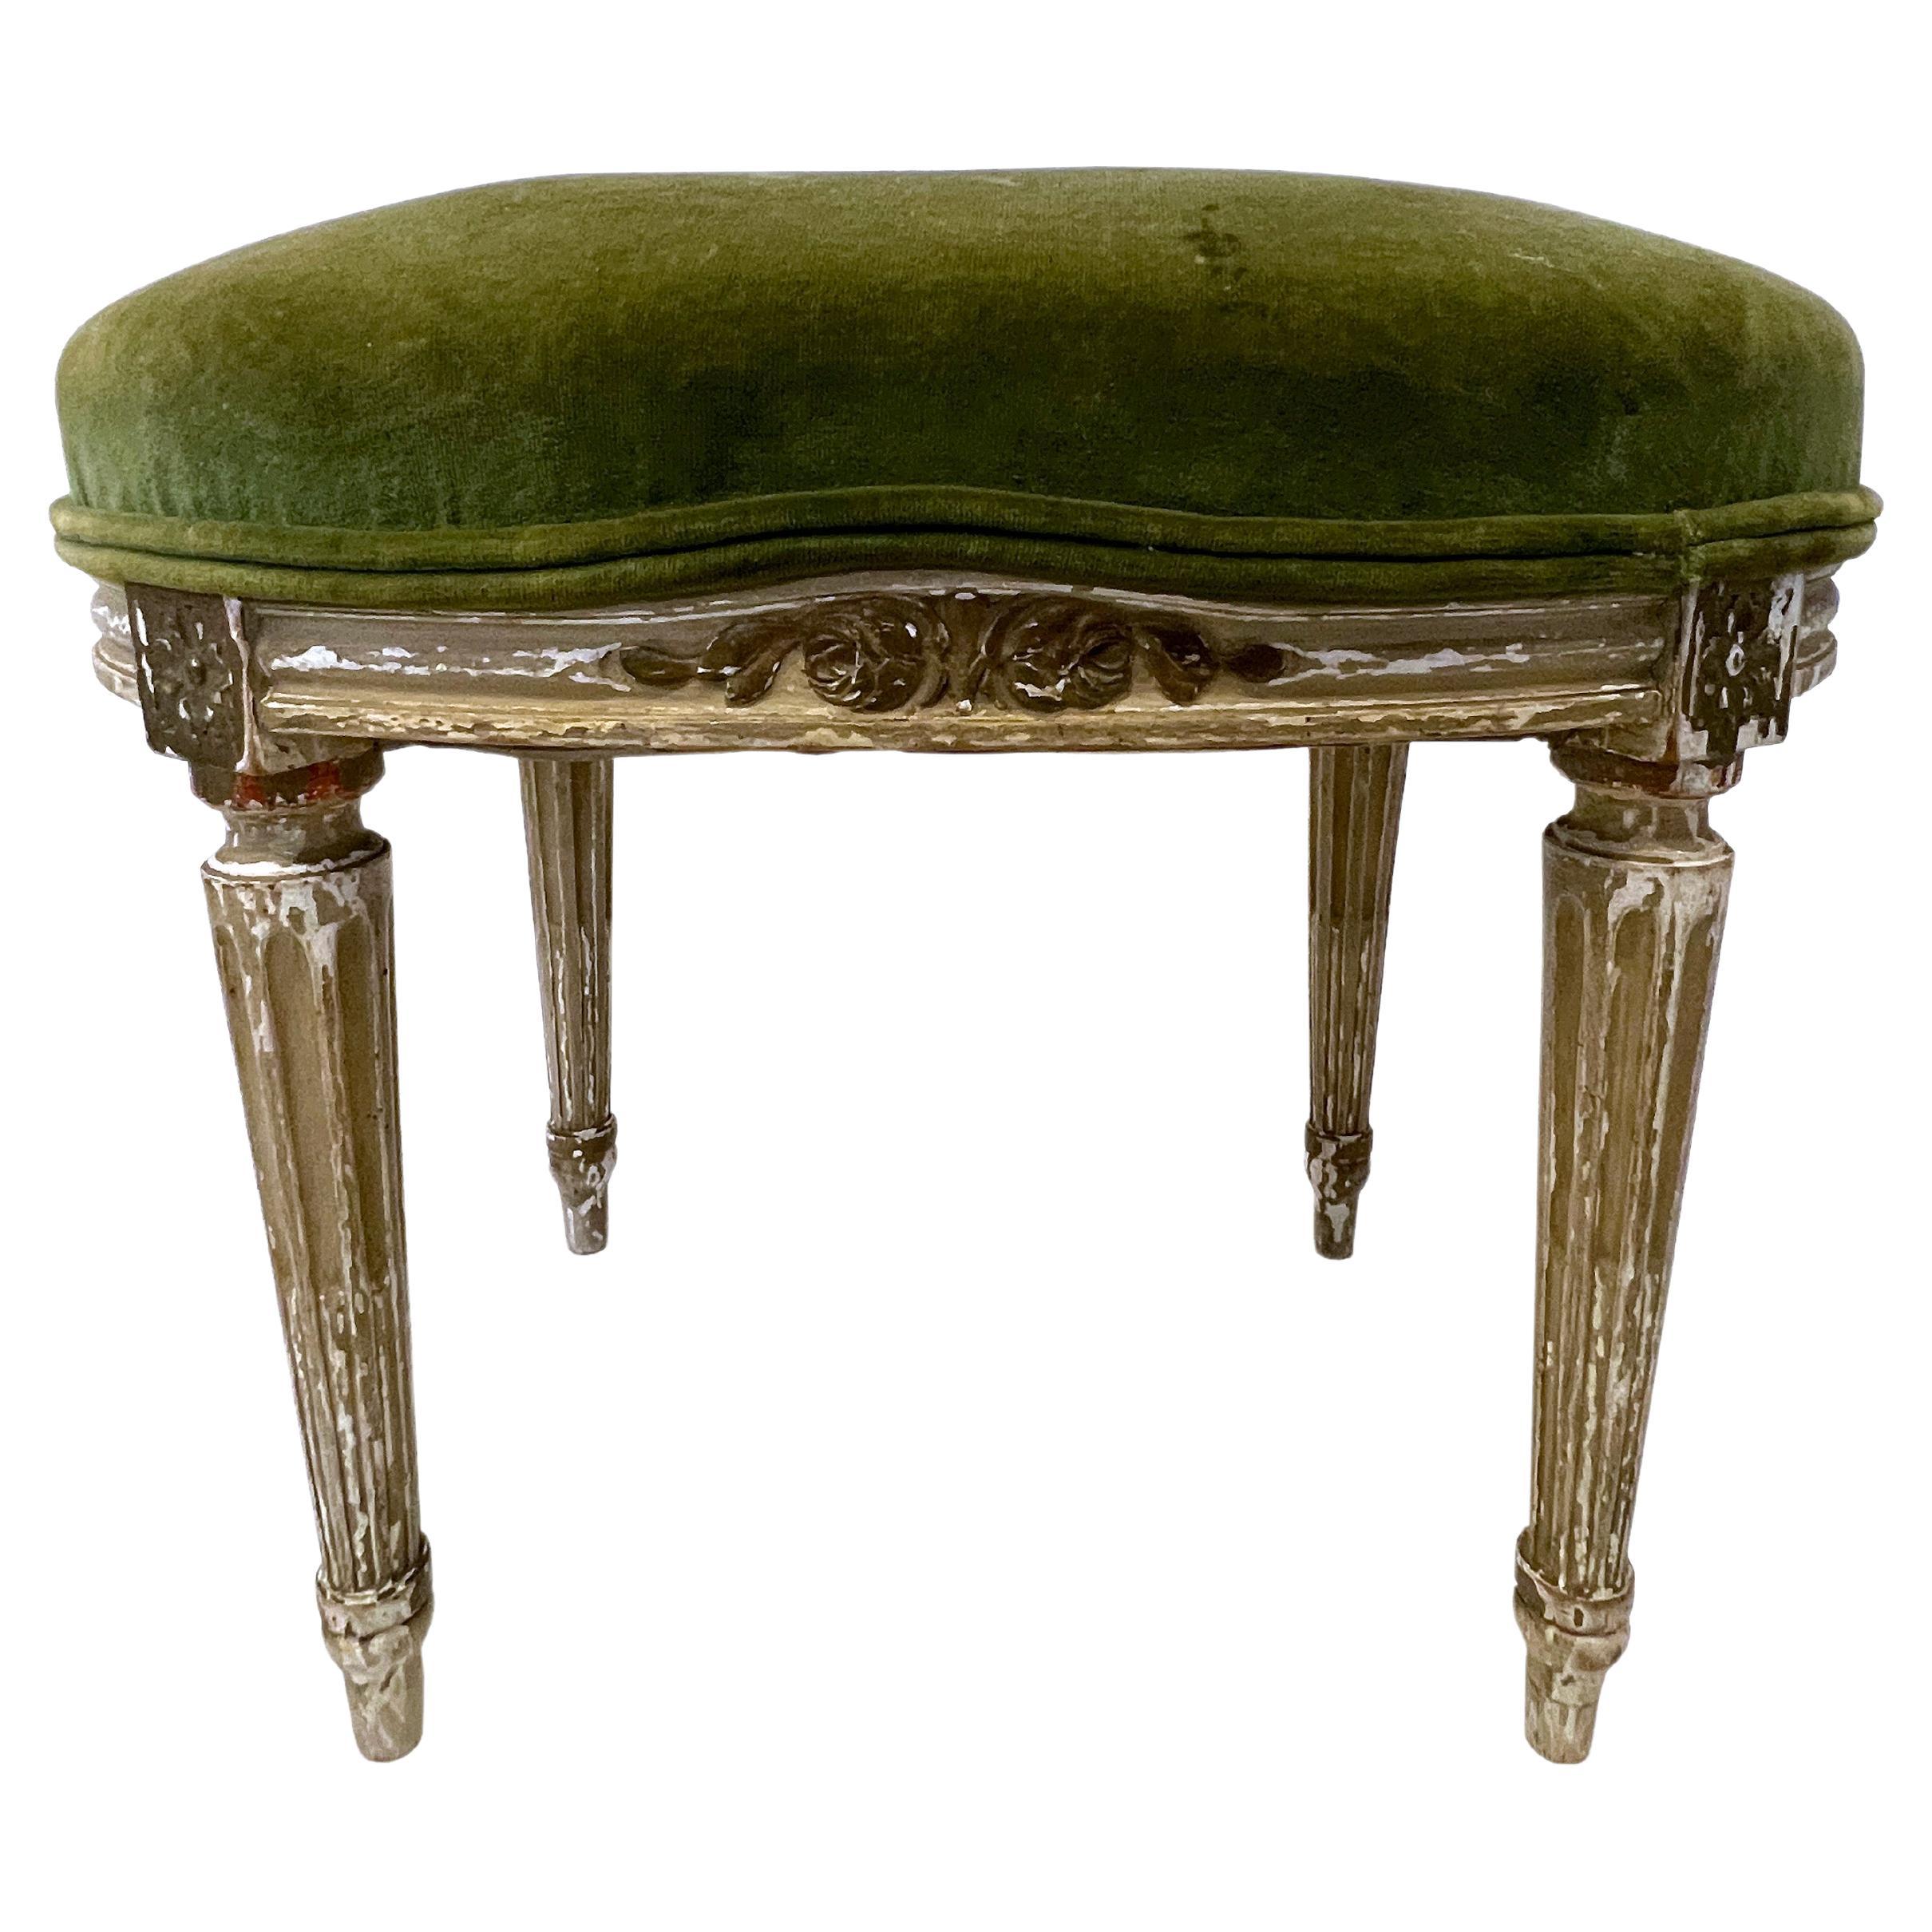 French Louis XVI Style Painted Stool with Olive Velvet Upholstery